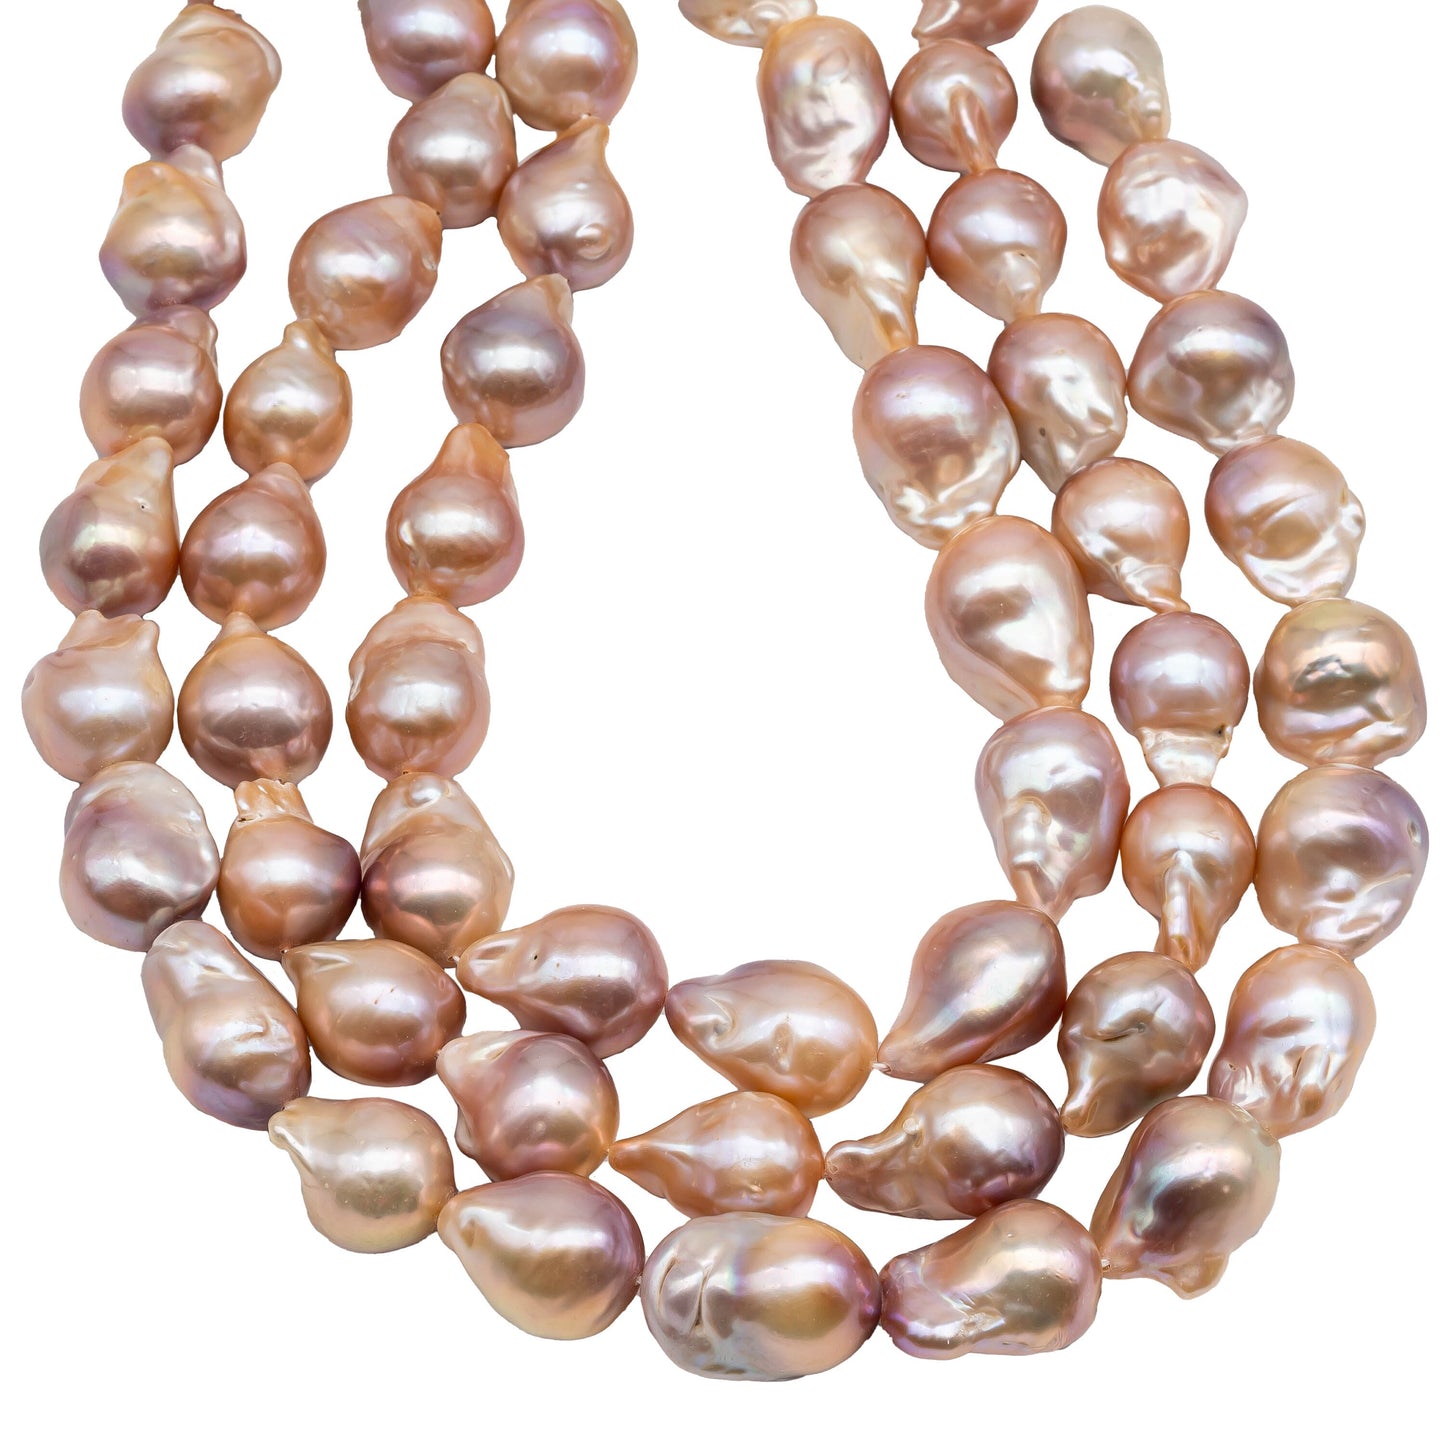 Multi-Color Baroque Pearl in Natural Color Freshwater Pearl Fireball Beads Large Size and High Luster in Full Strand, 13-17mm, SKU# 1119BA